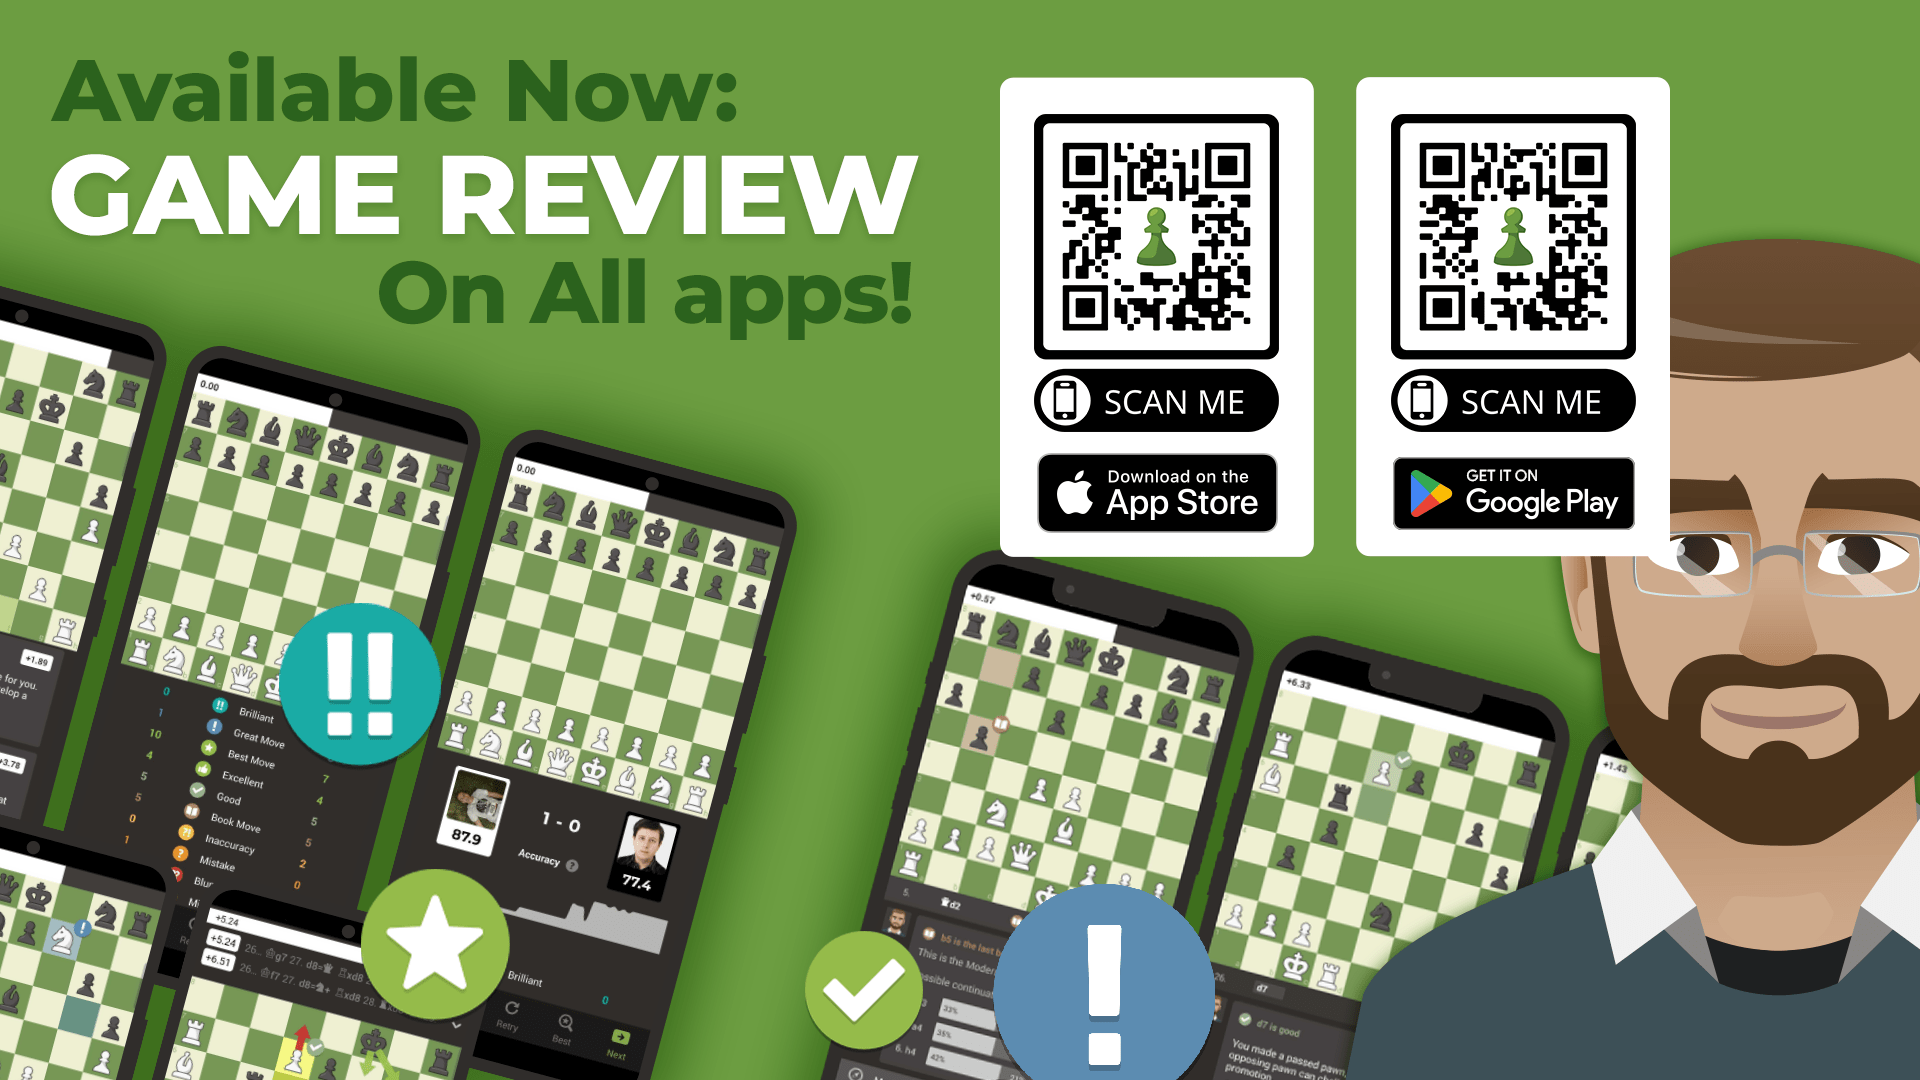 Game Review Now On Mobile Apps